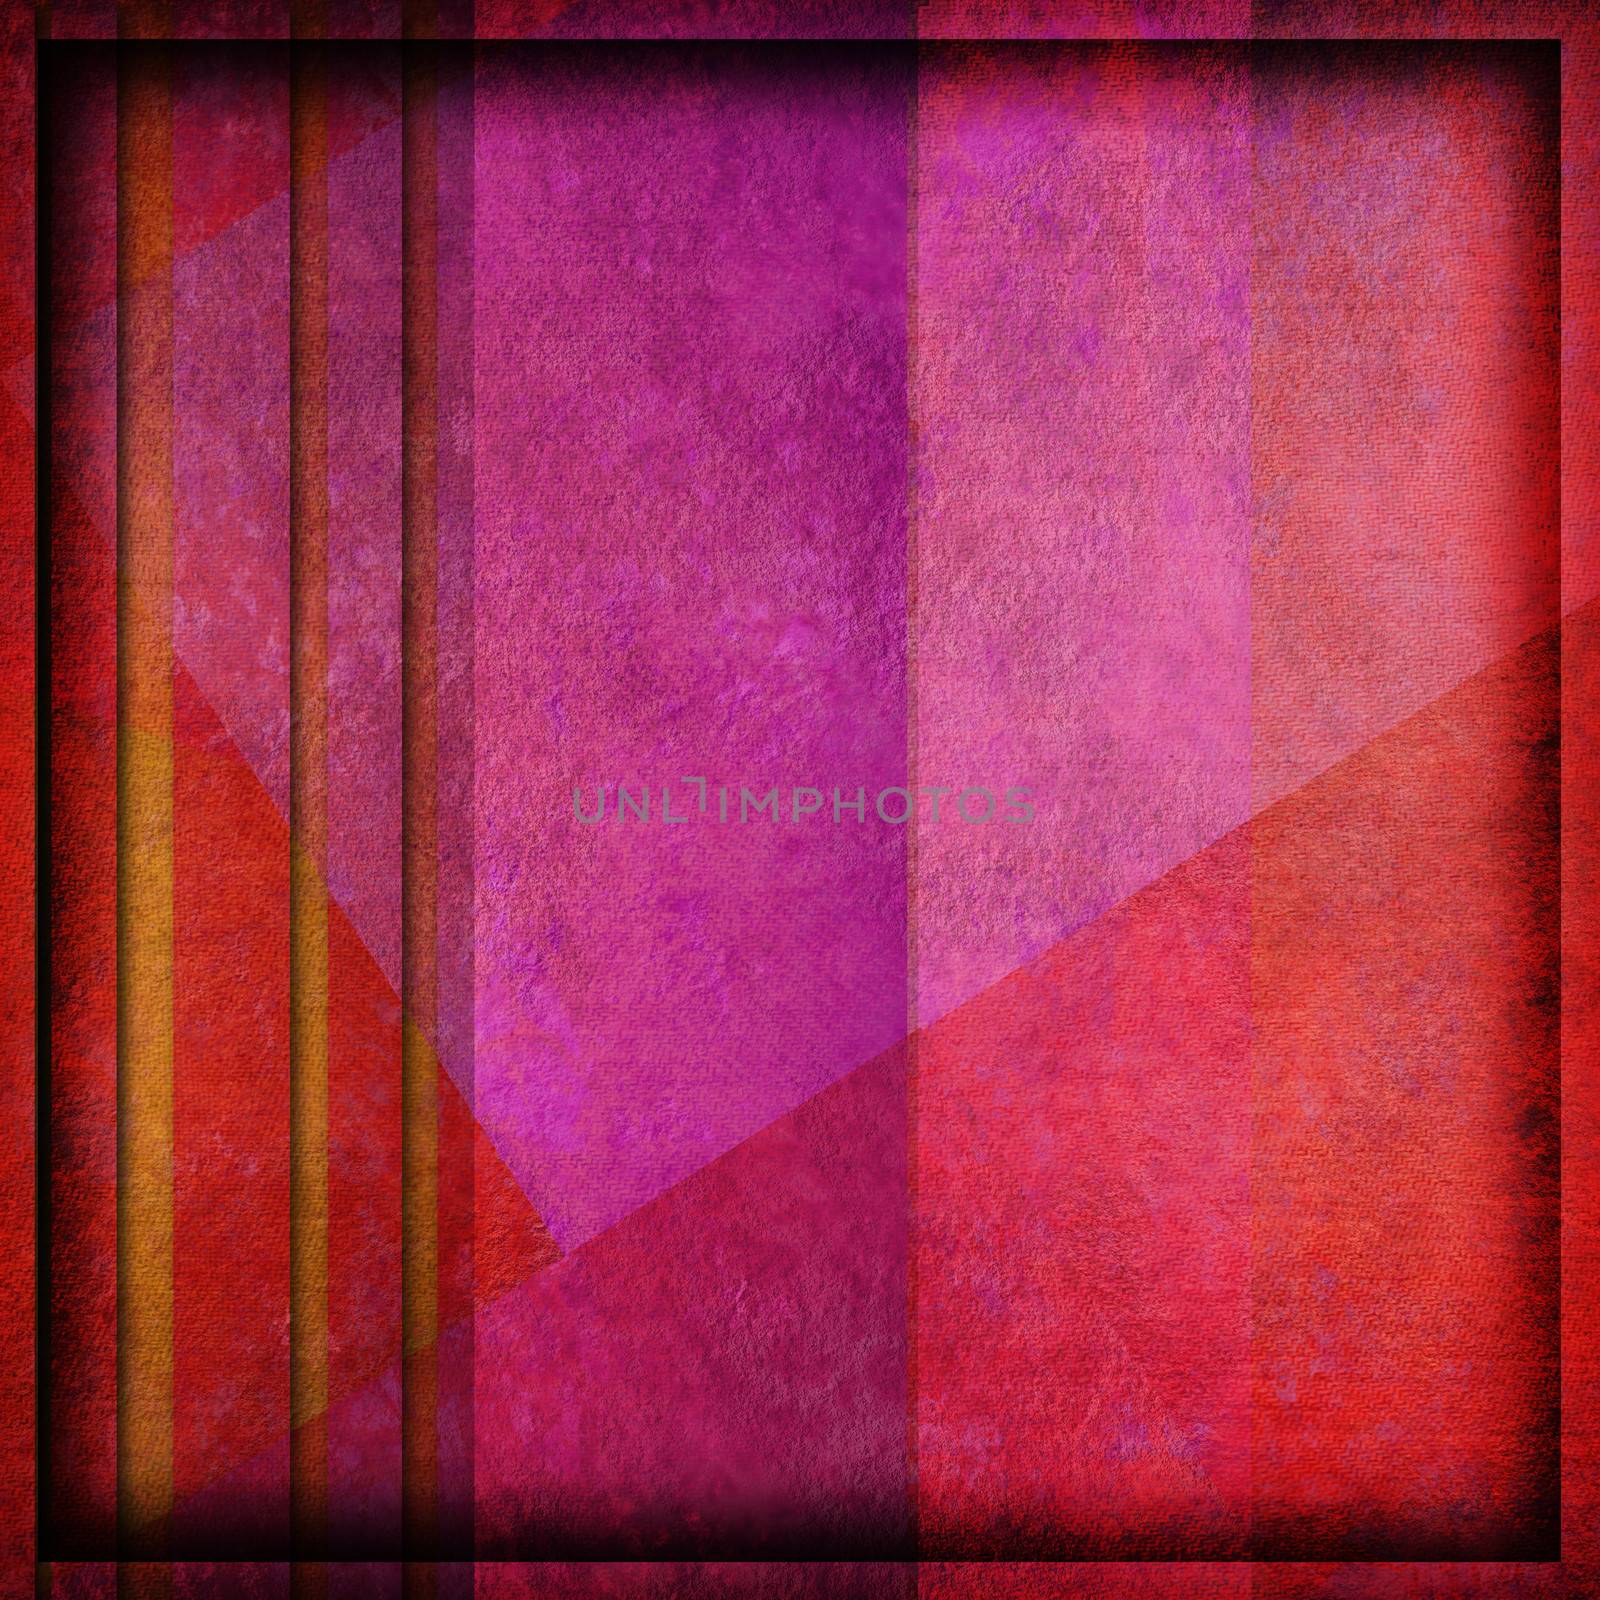 grunge frame background pink and red by Carche